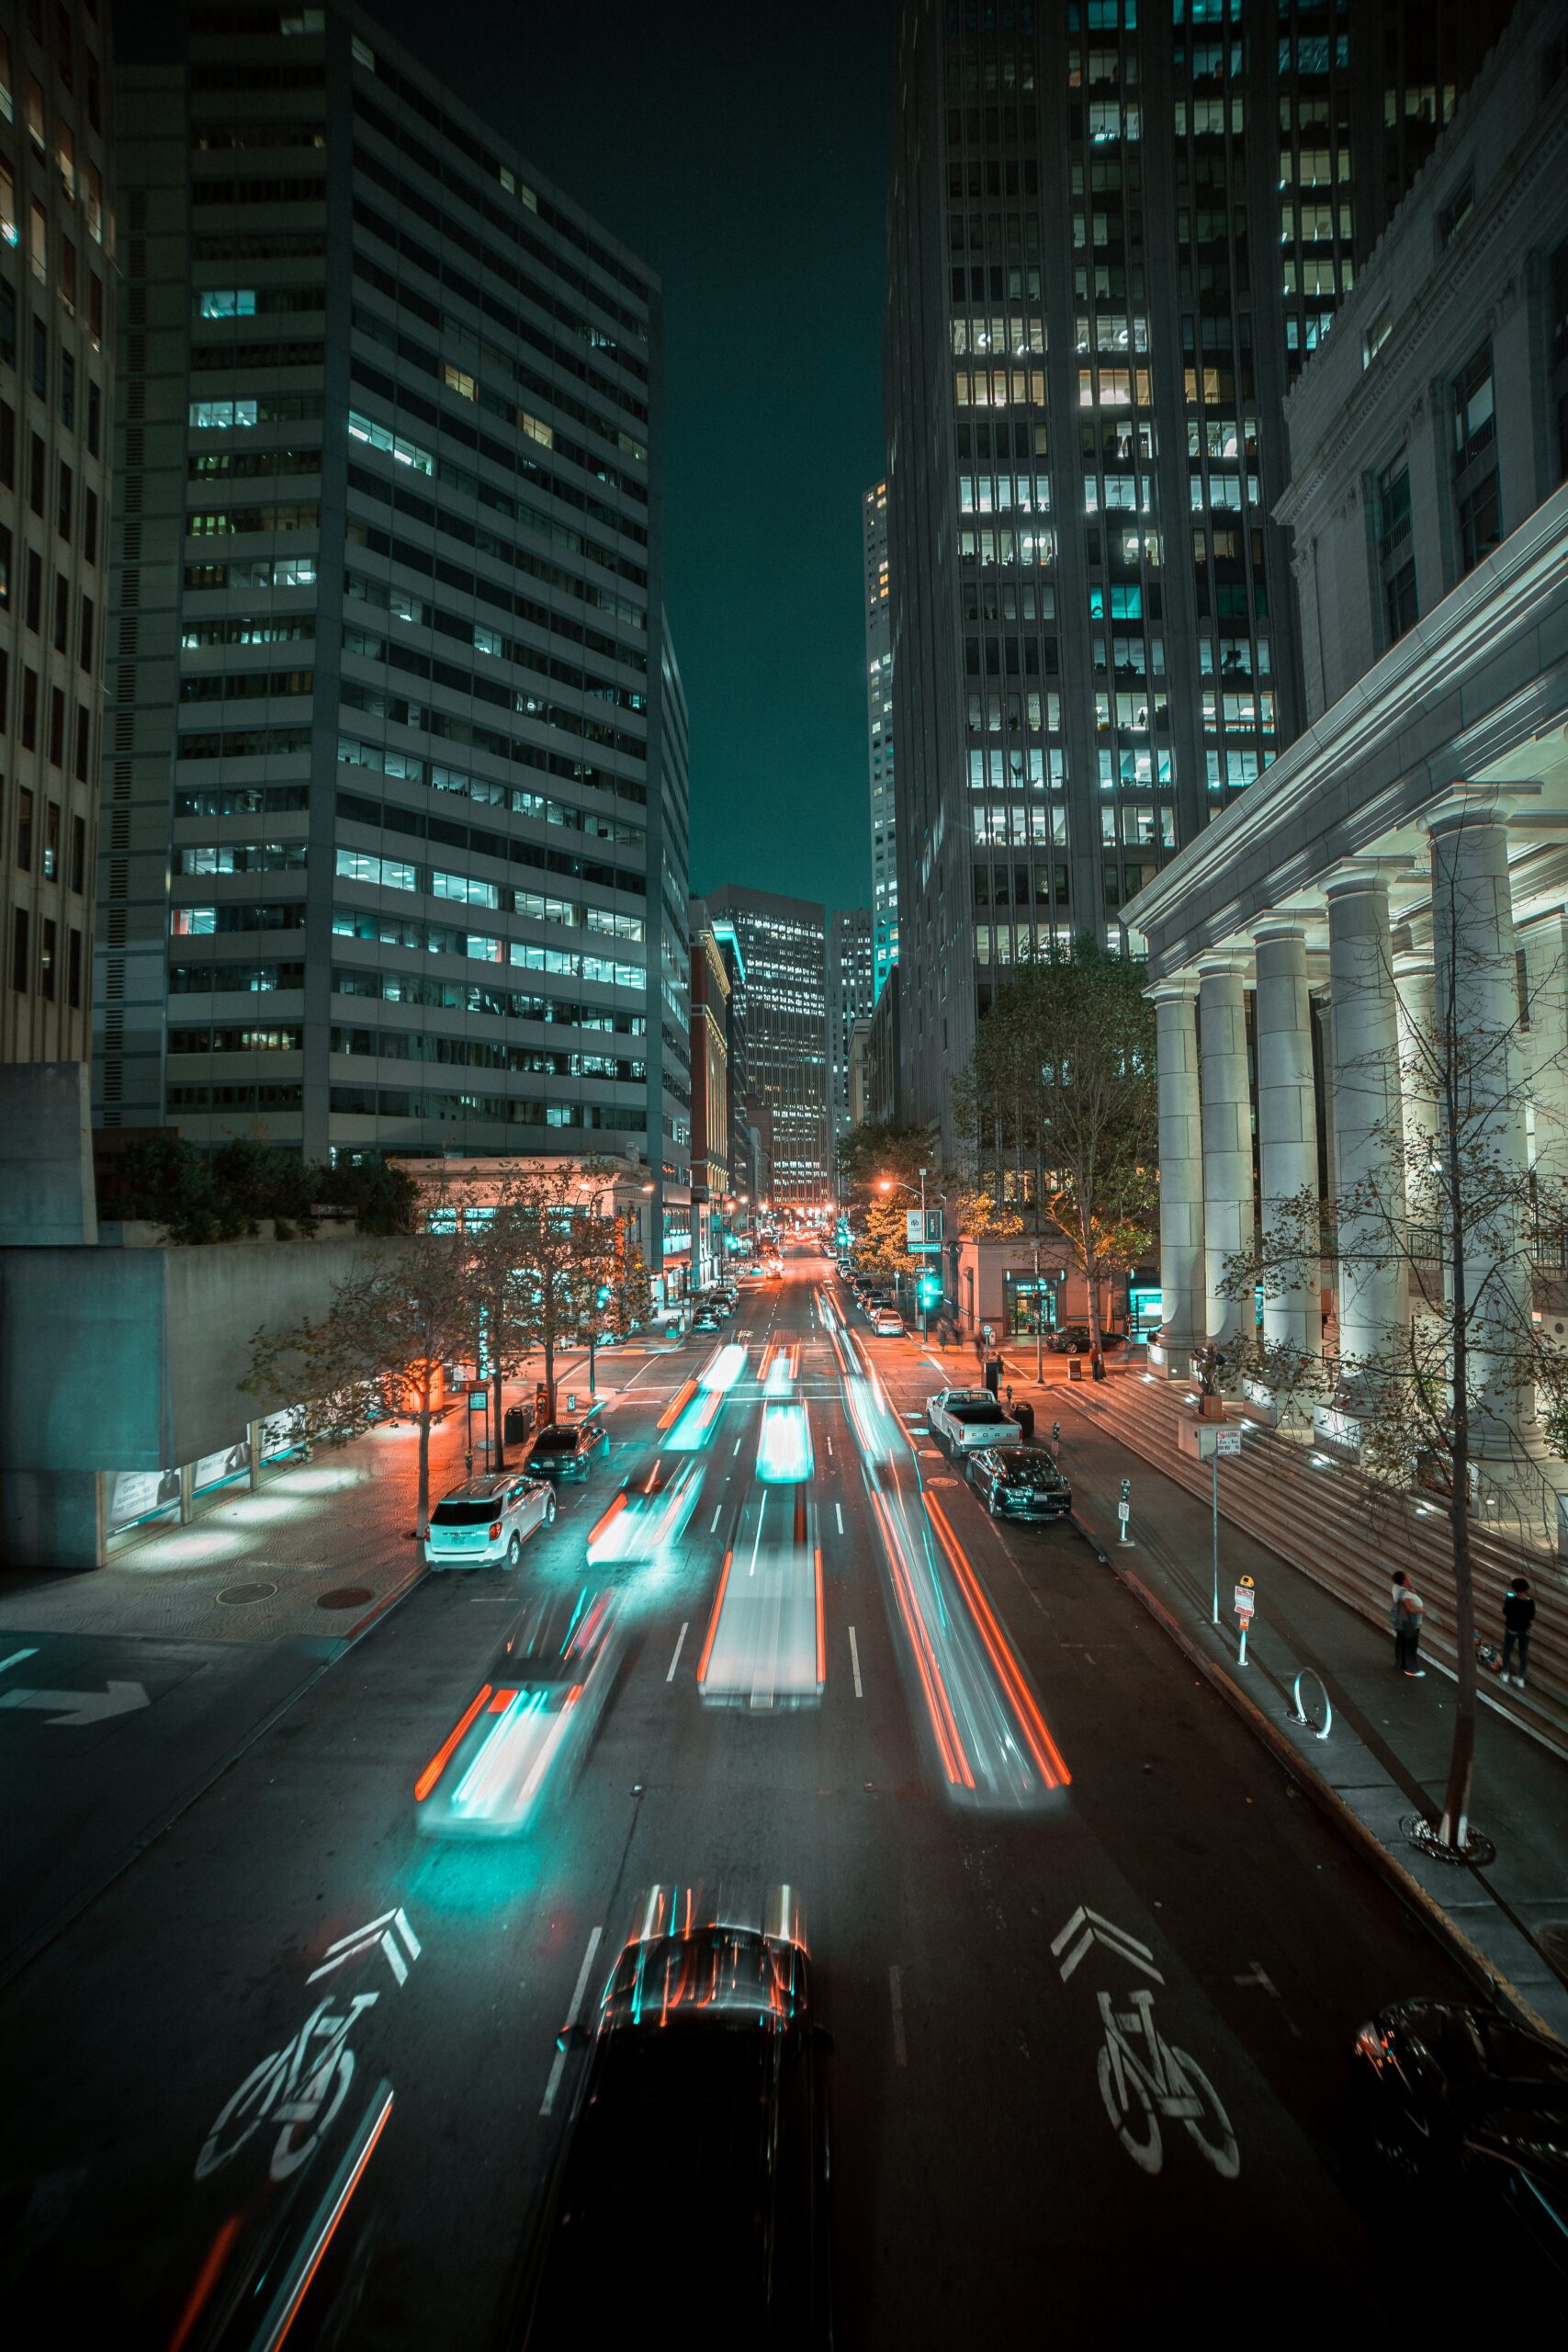 City street at night with light trails